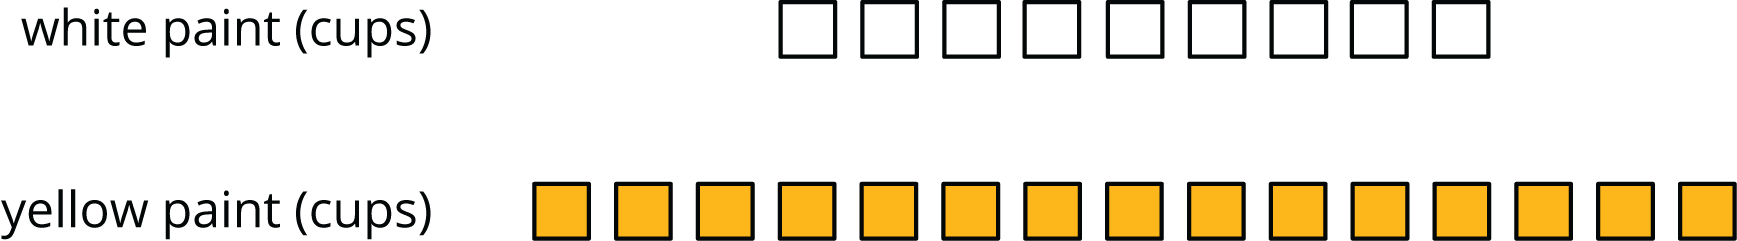 A discrete diagram for two quantities labeled "white paint, in cups" and "yellow paint, in cups". The data are as follows: white paint, 9 squares. yellow paint, 15 squares.